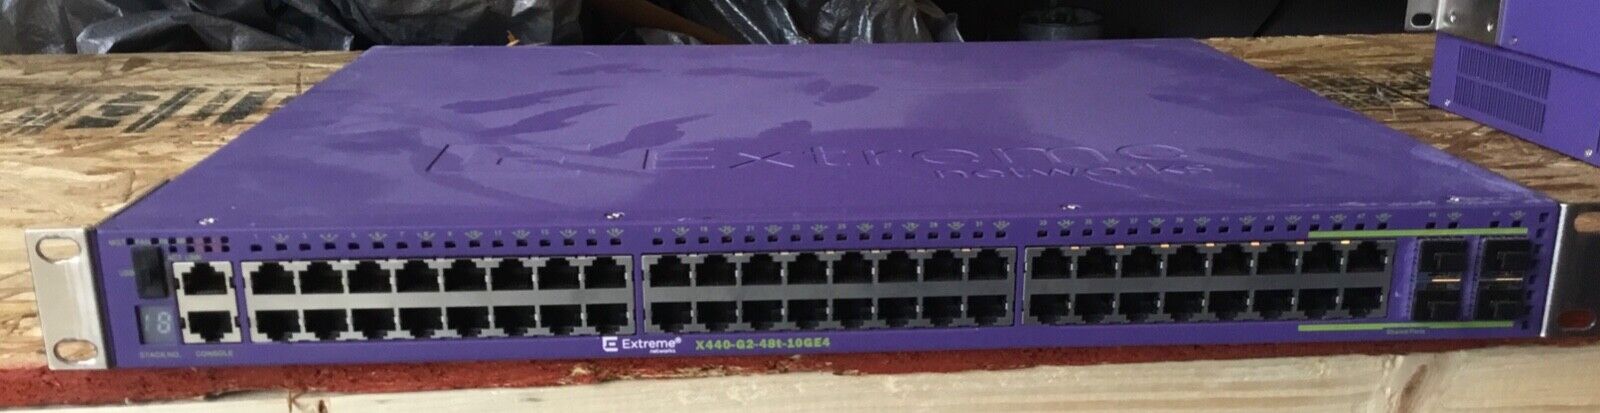 Extreme Networks ExtremeSwitching X440-G2 X440-G2-48t-10GE4 (16534)- Very Good